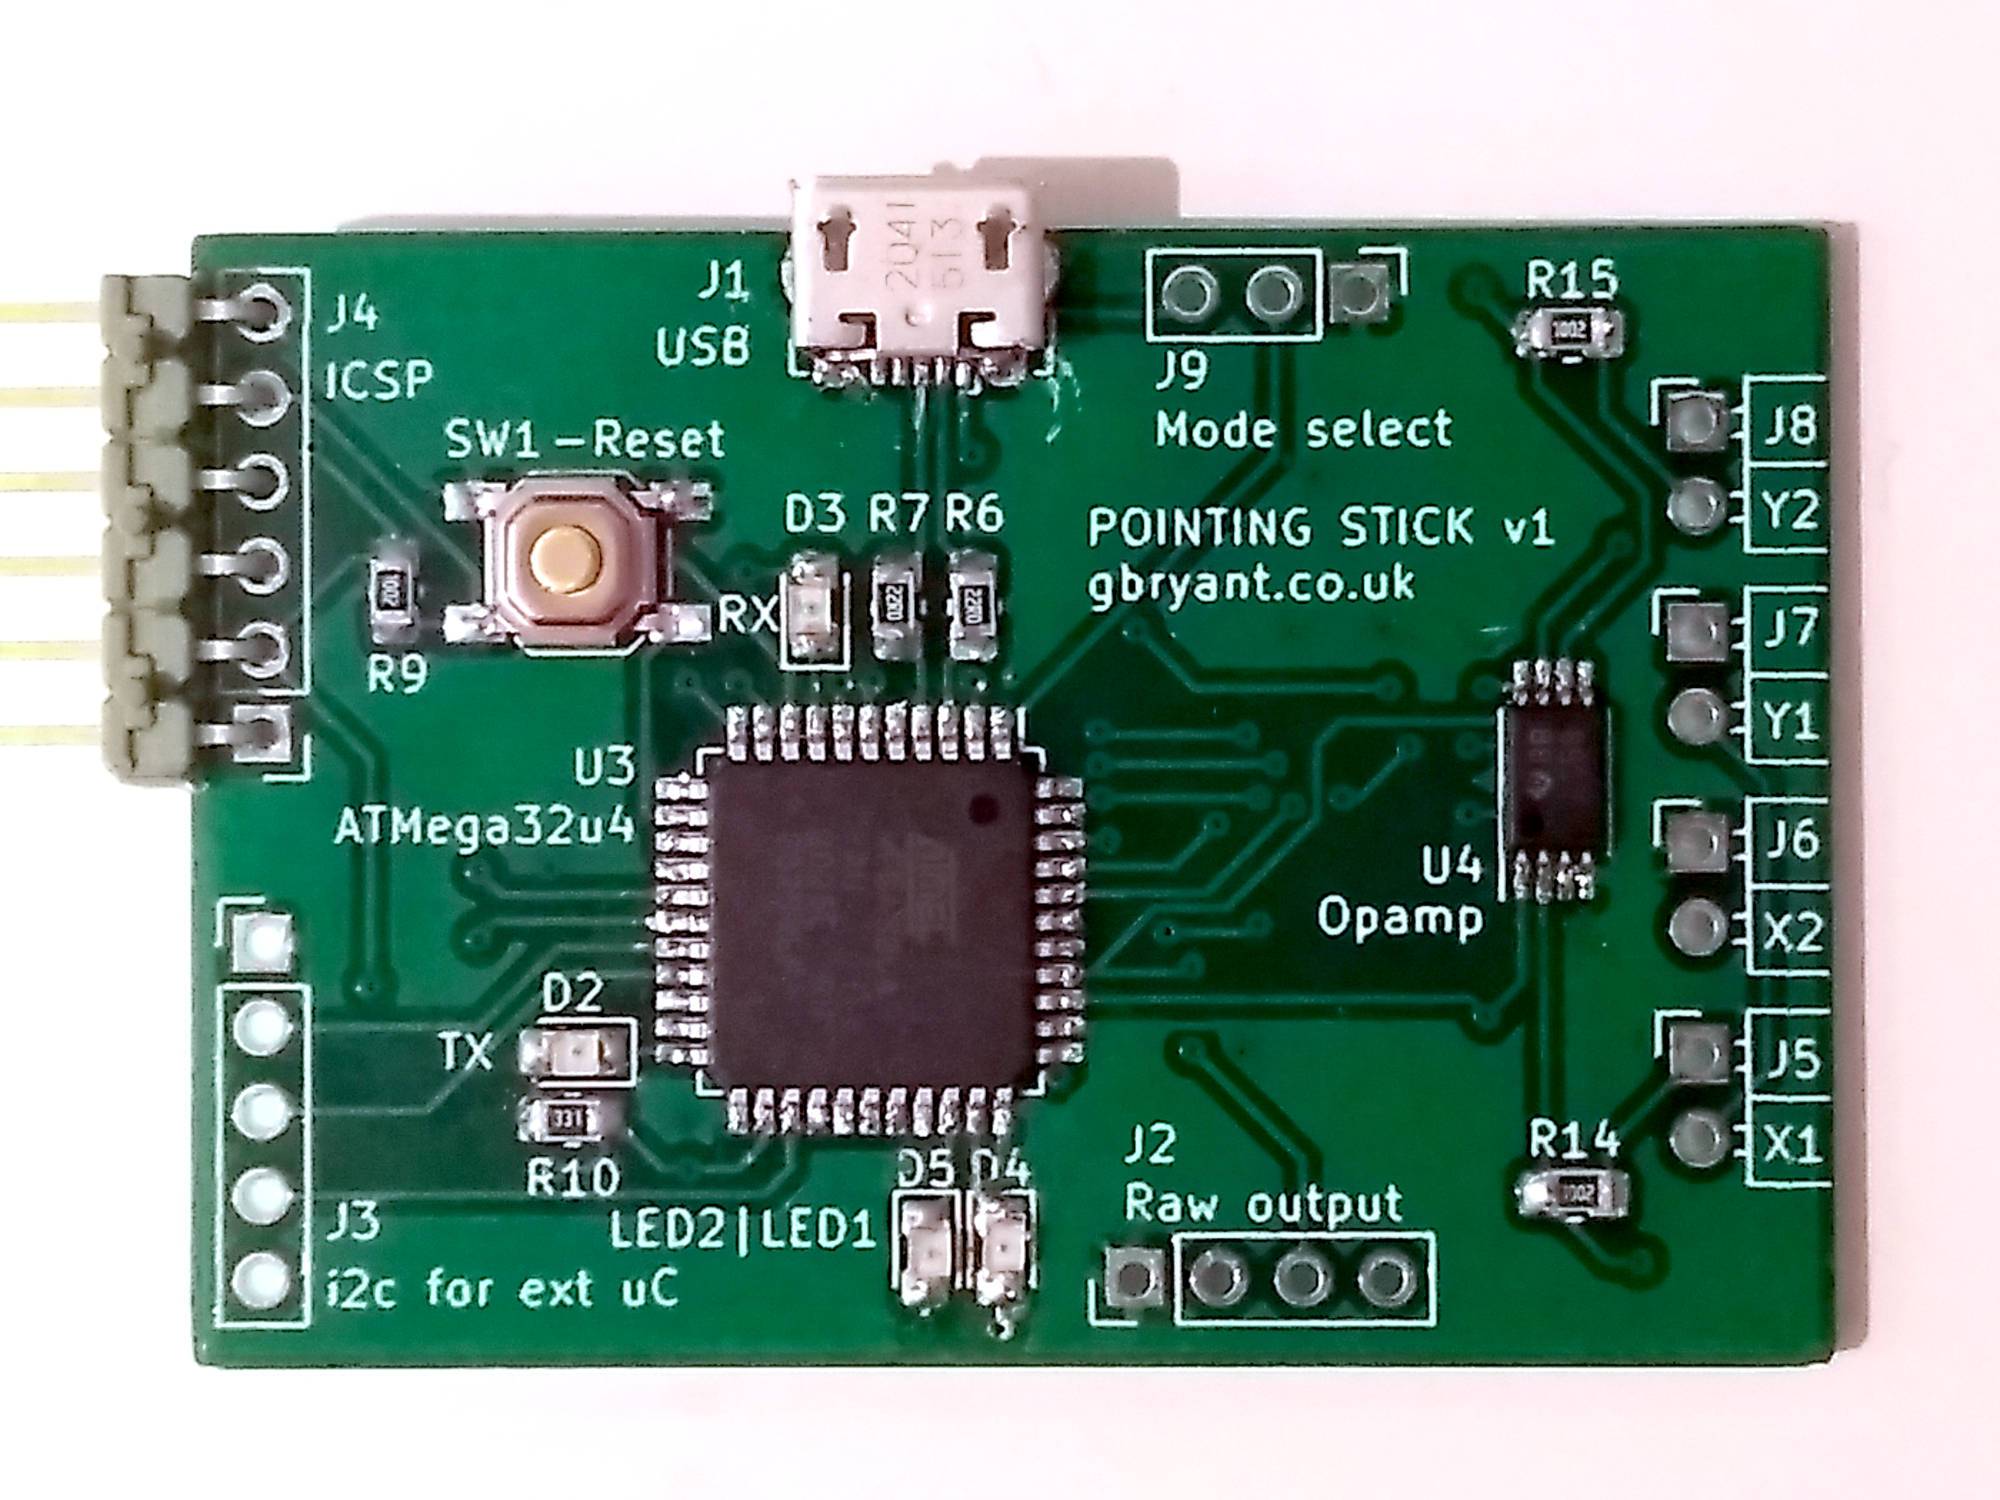 Photo of my assembled pointing stick PCB